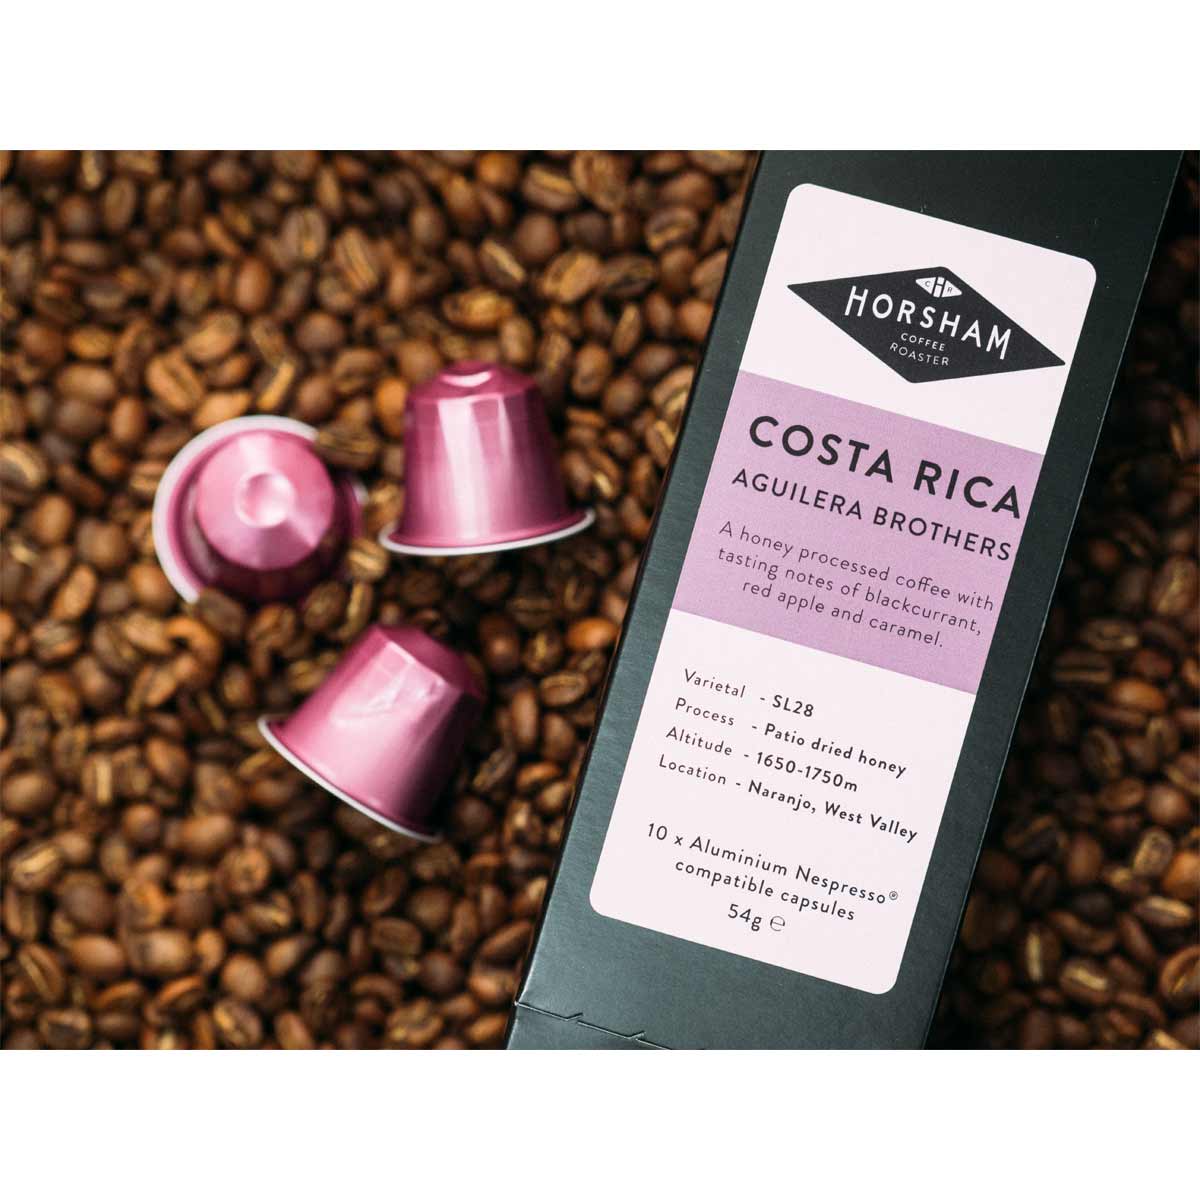 Costa Rica Coffee Capsules - reduced to clear